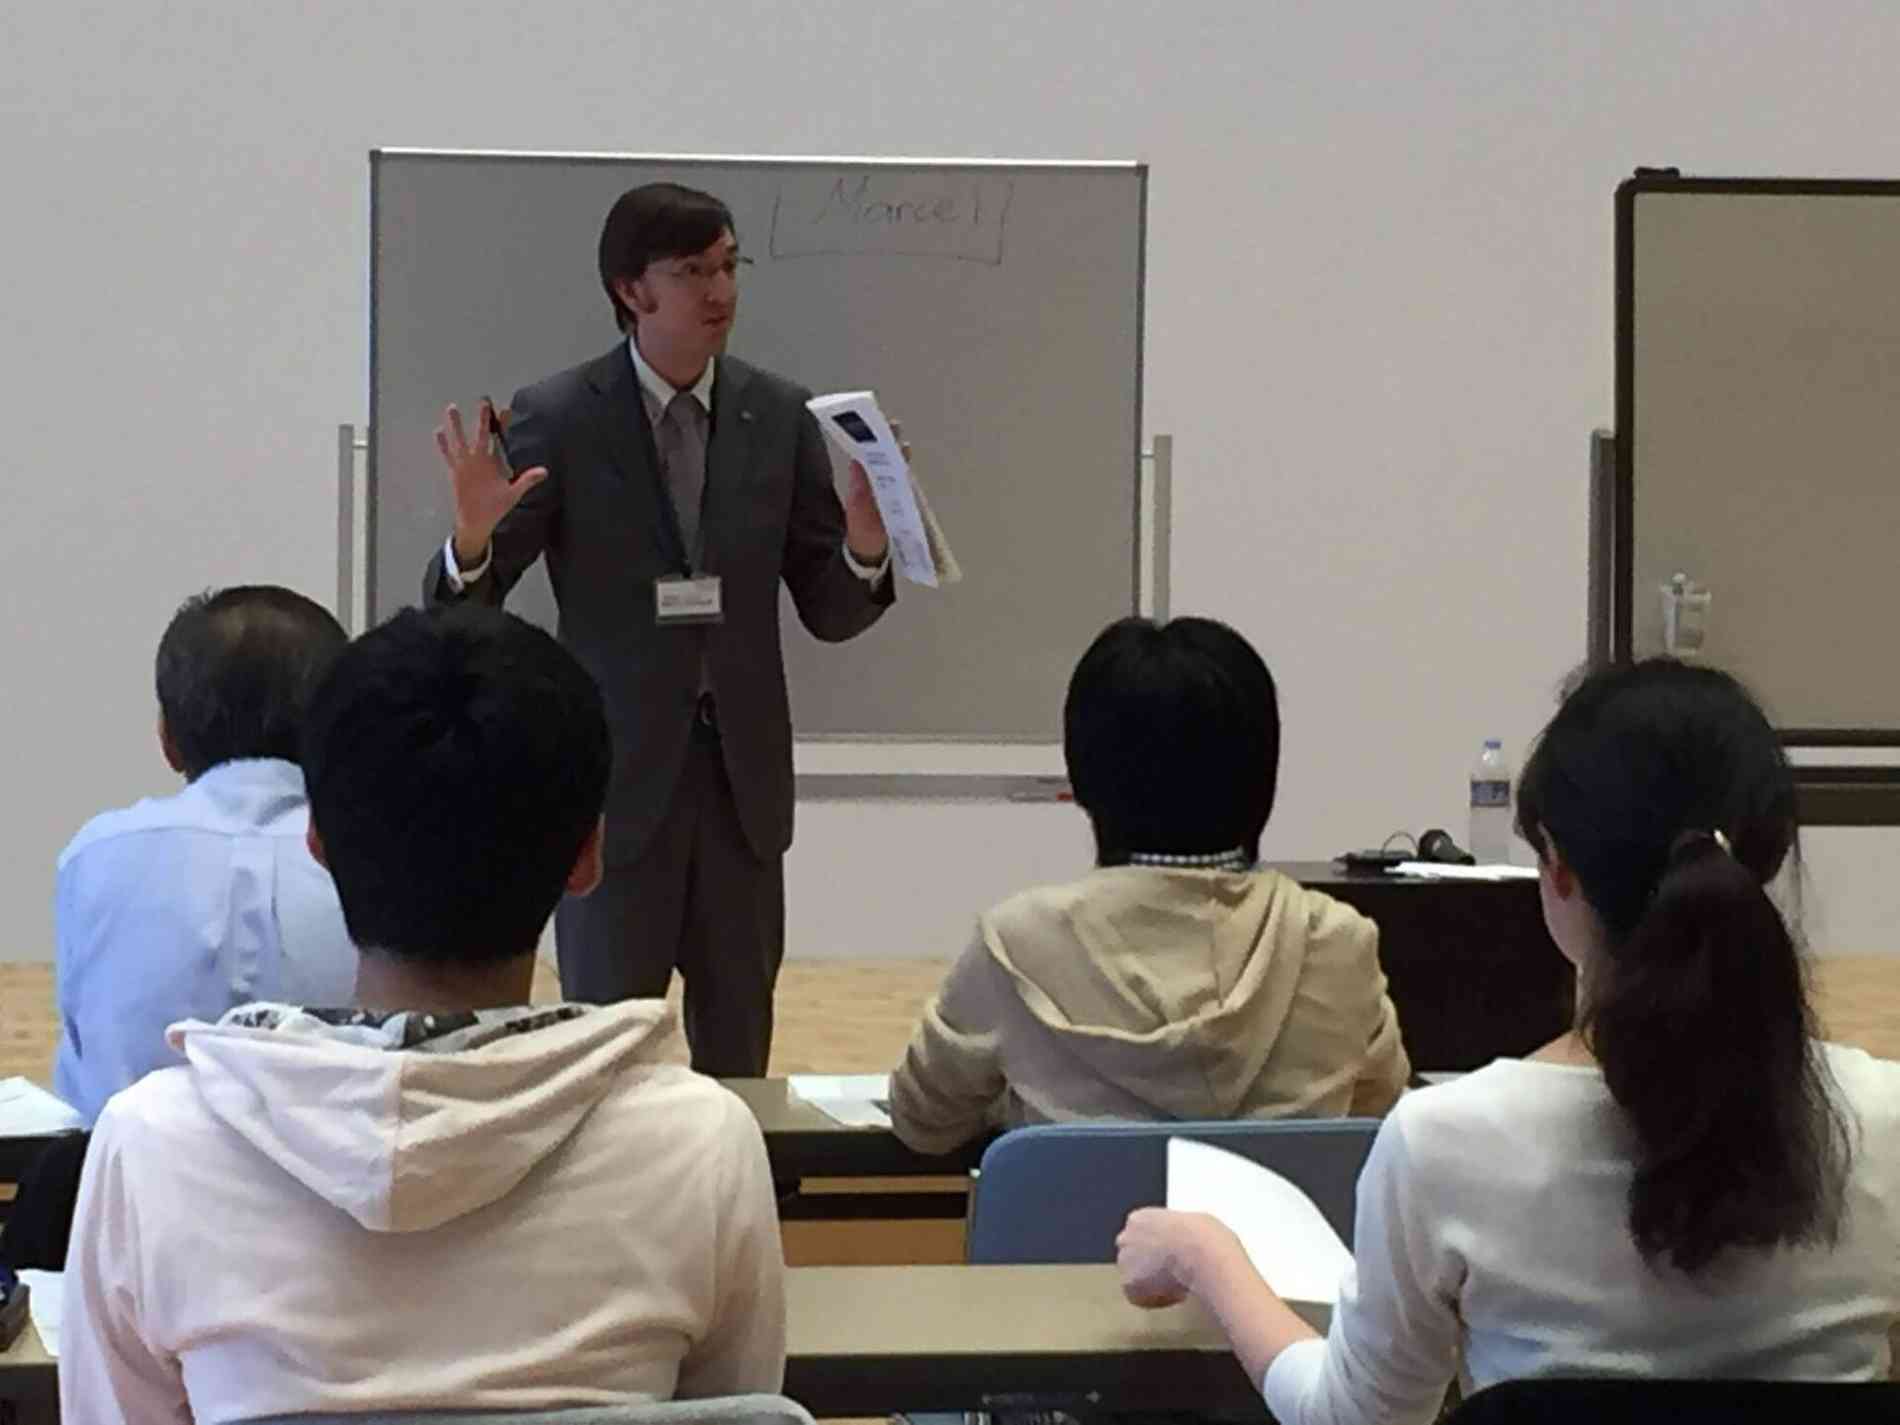 Marcel in the classroom